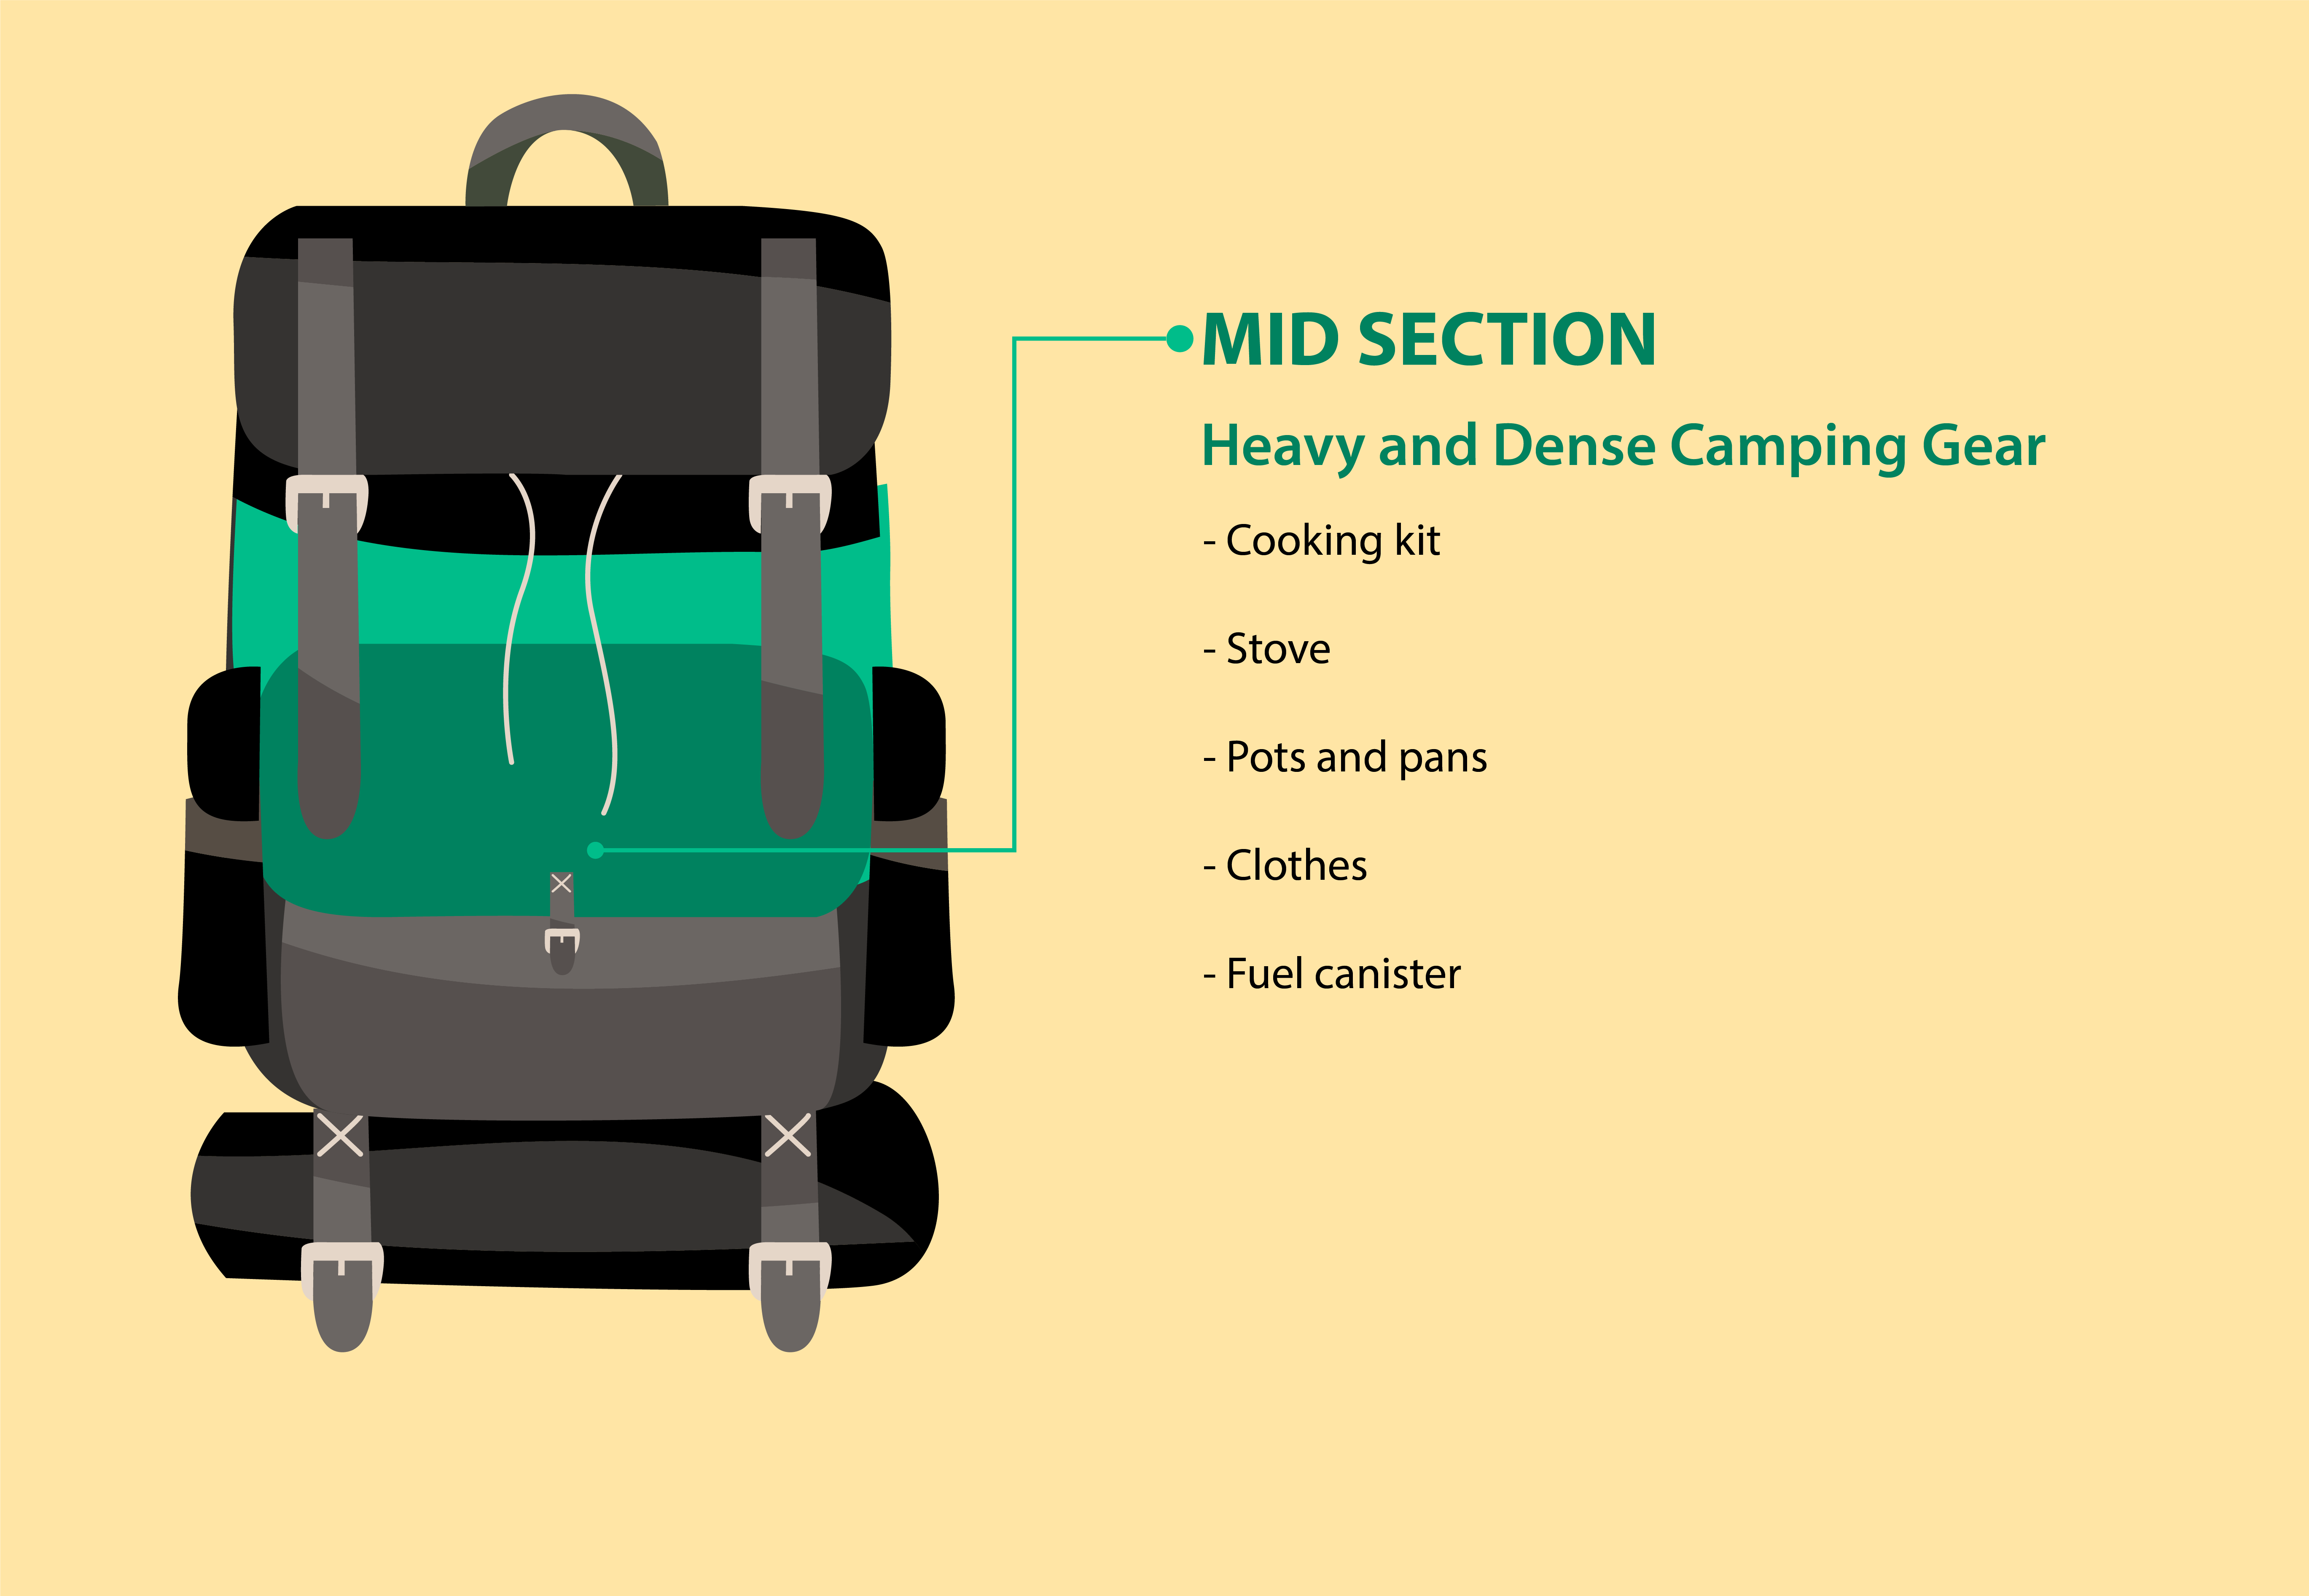 mid section of the backpack - pack heavy items